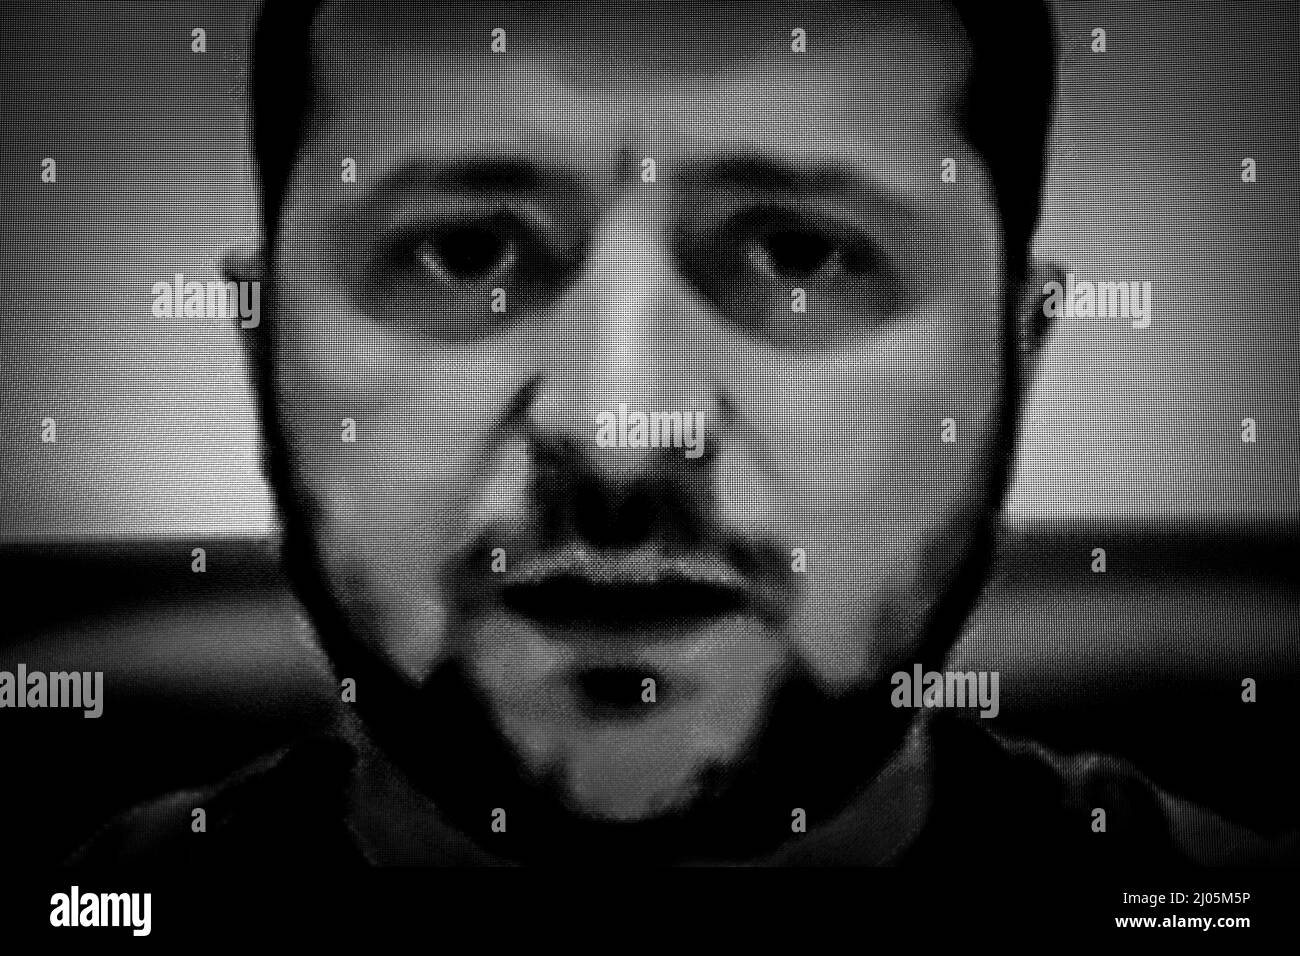 The image of Ukrainian President Volodymyr Zelenskyy is seen on a television screen during his virtual address to Congress by at the US Capitol, in Washington, DC, Wednesday, March 16, 2022. The address included graphic images and videos of the current war in Ukraine. Credit: Rod Lamkey/CNP Stock Photo